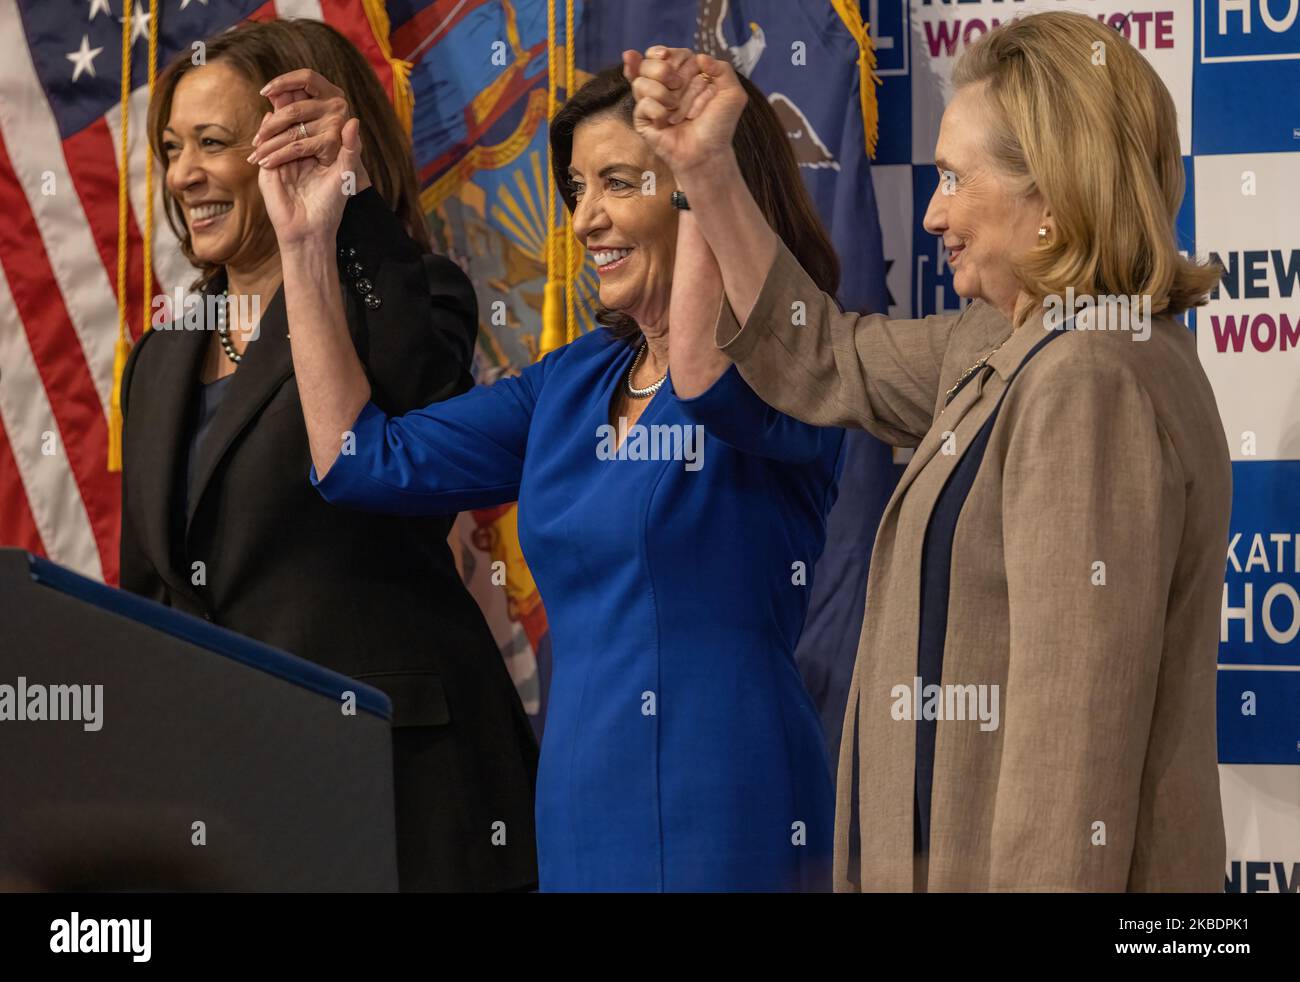 NEW YORK, N.Y. – November 3, 2022: Vice President Kamala Harris, Gov. Kathy Hochul, and Fmr. Sec. of State Hillary Clinton are seen at a rally. Stock Photo